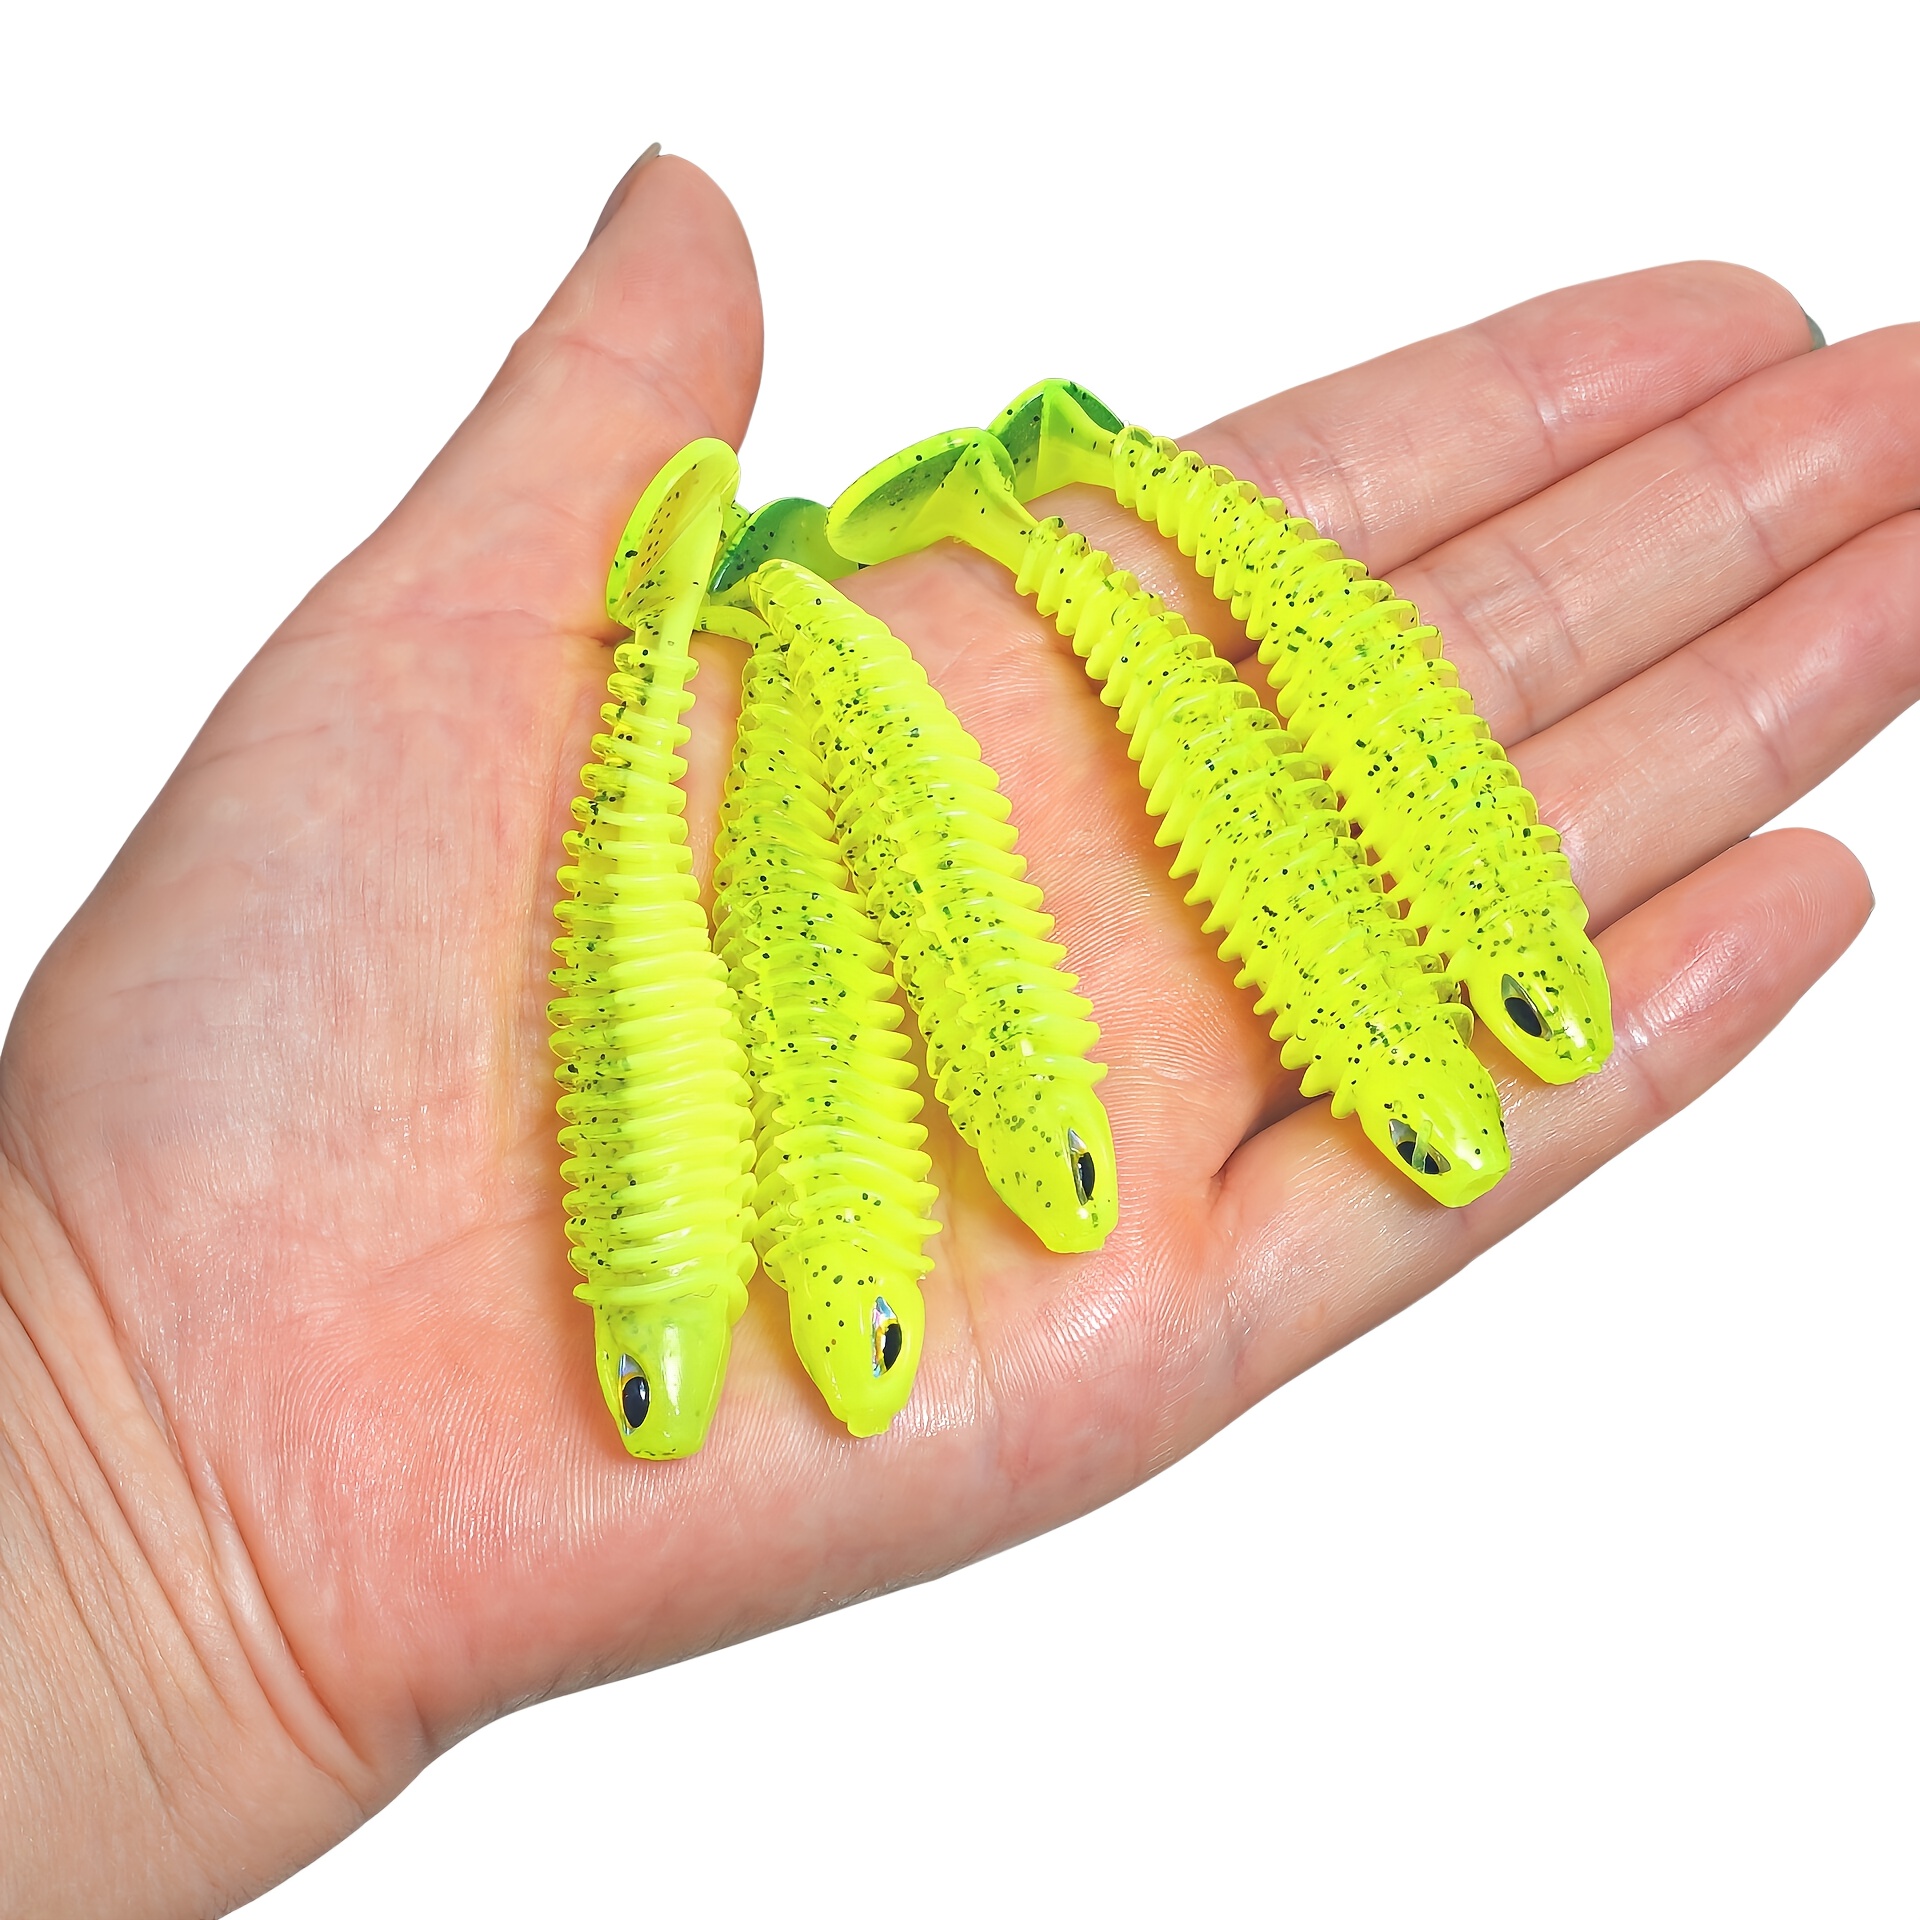 Qiilu 5Pcs/Lot Silicone Soft Lifelike Fishing Lures Turtle Bait with  Sequins Tackle Accessories , Lifelike Fishing Baits, Fishing Tackle  Accessories 